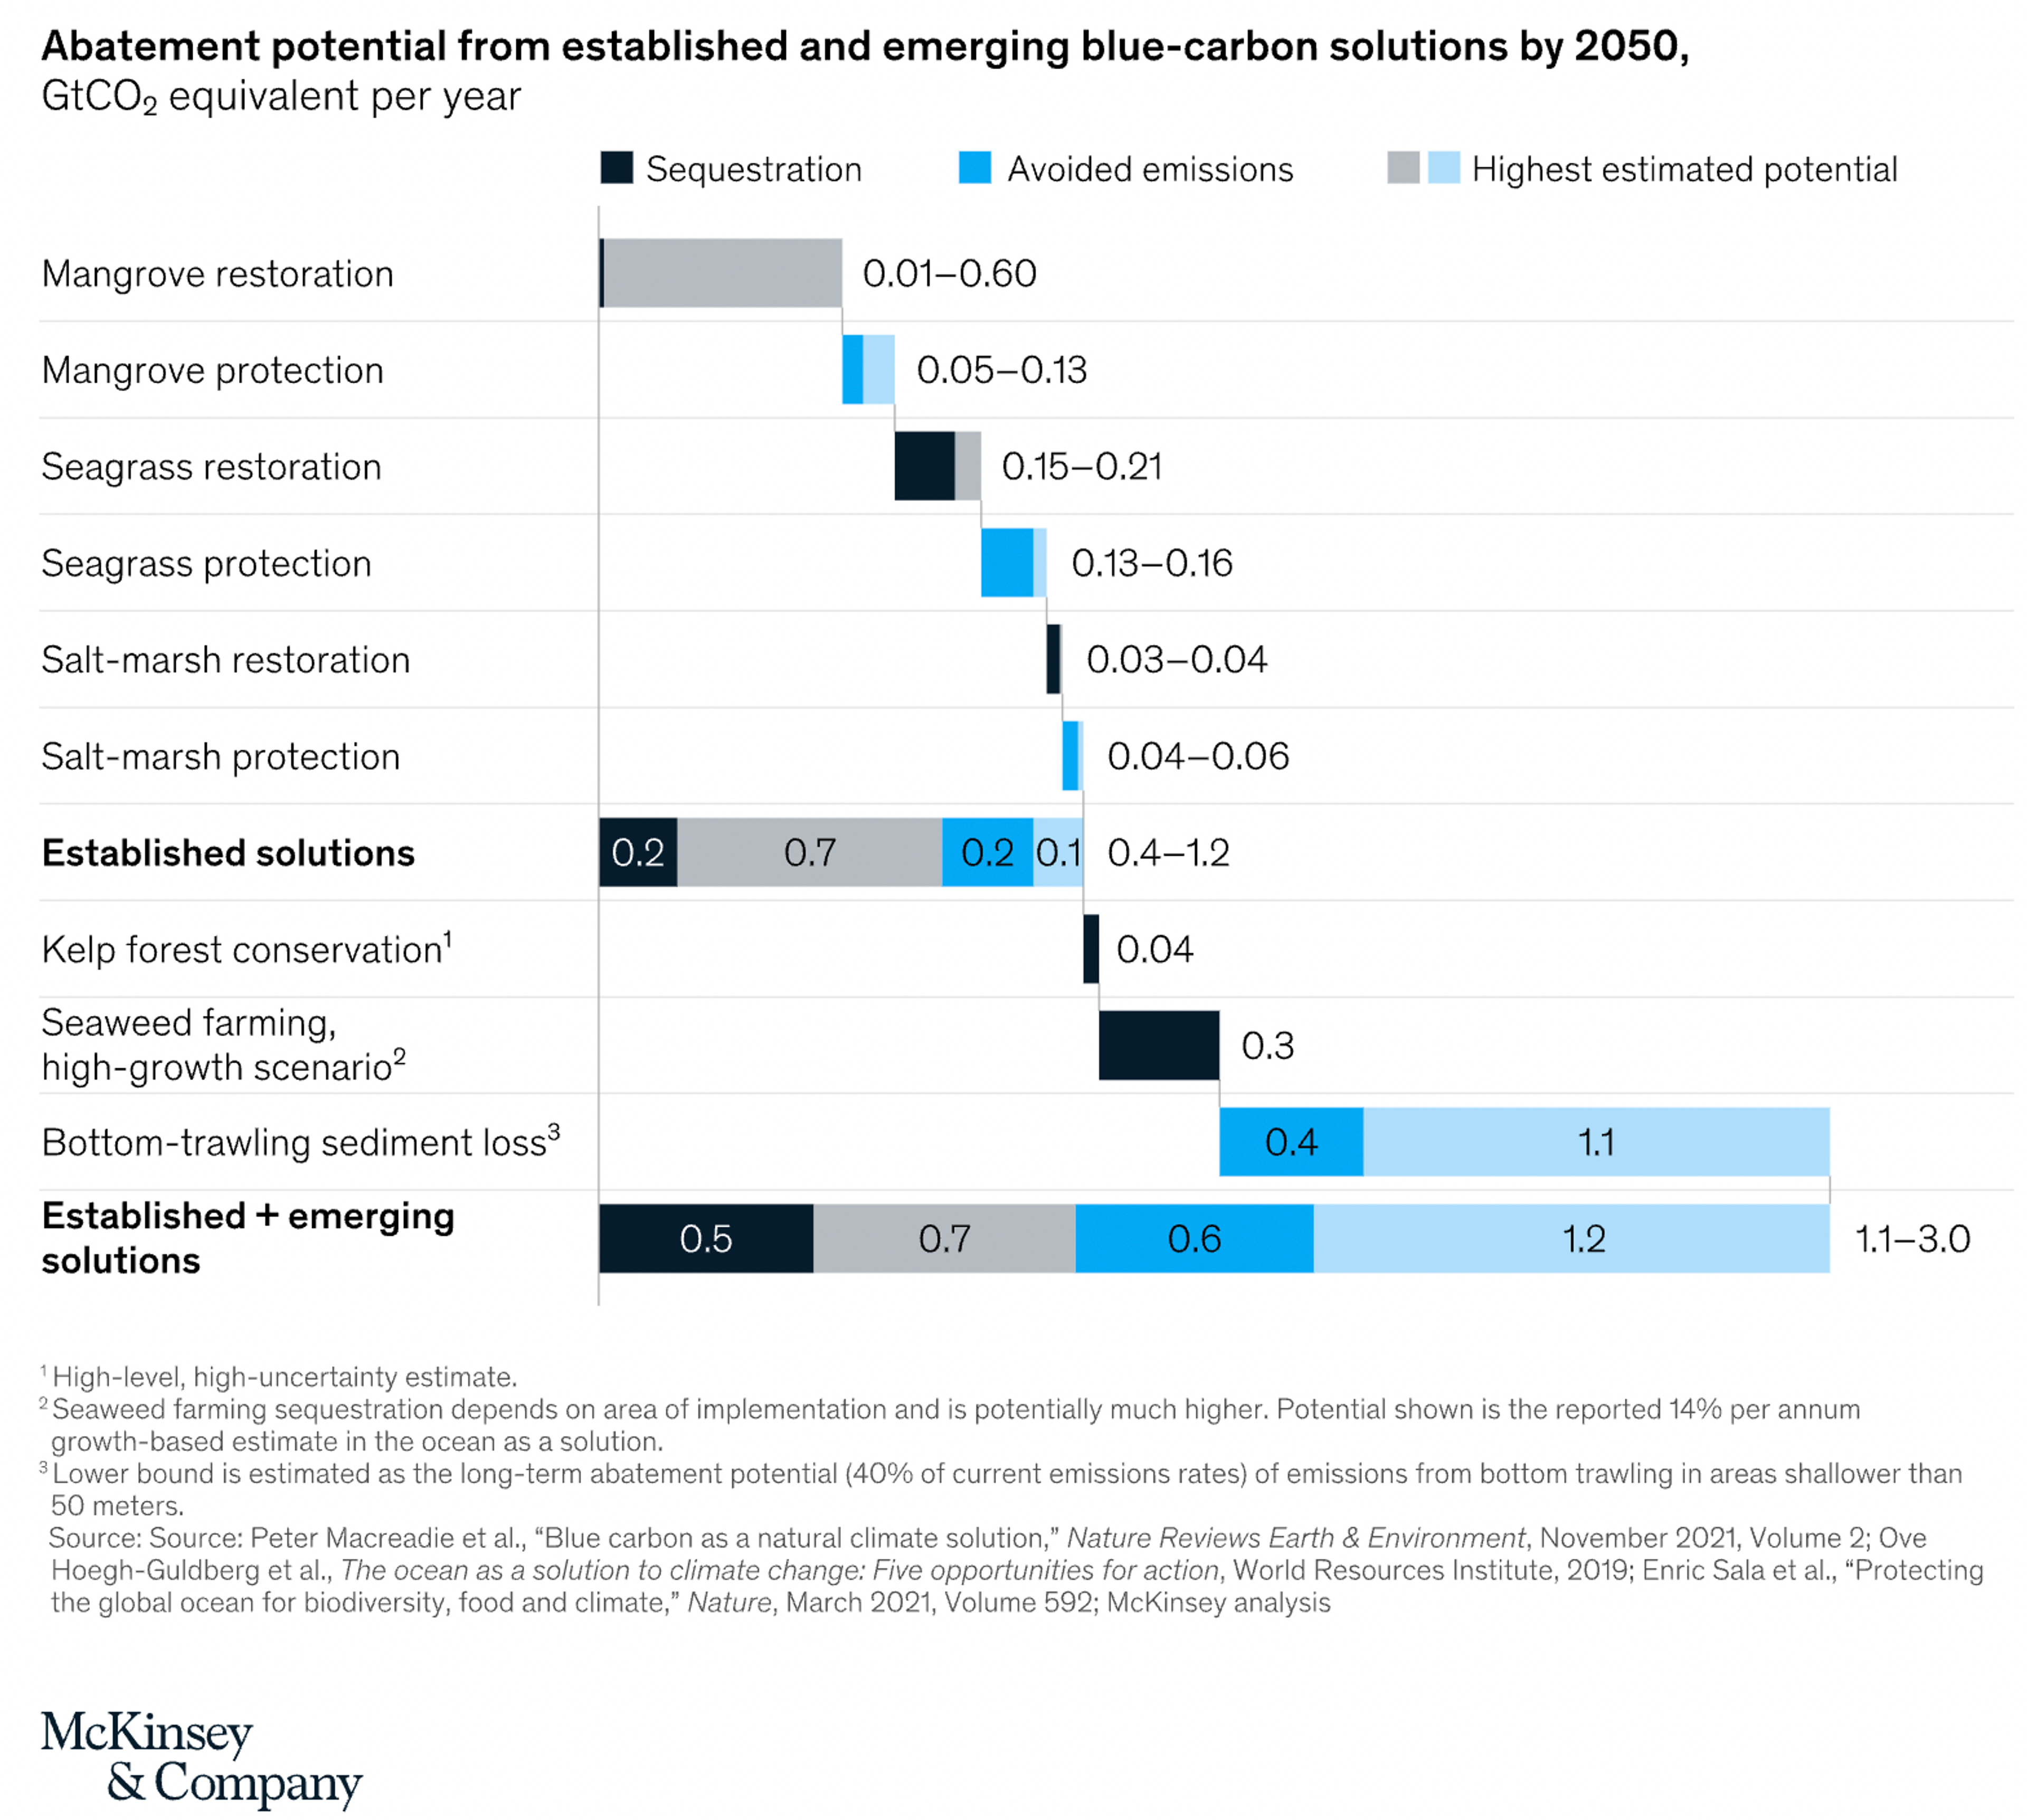 Graph of Abatement potential from established and emerging blue-carbon solutions by 2050